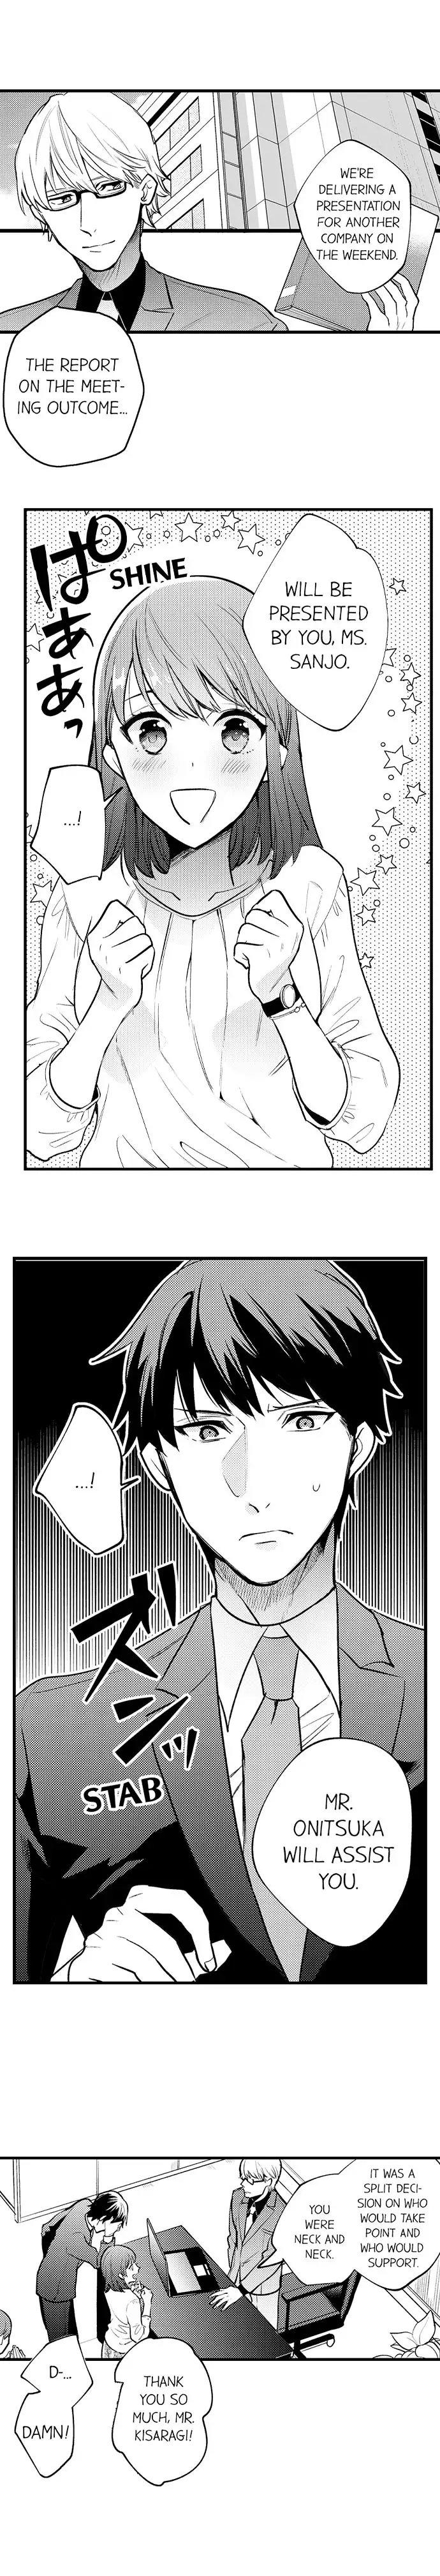 Esposa 3 Hours + Love Hotel = You’re Mine Perfect Teen - Page 3